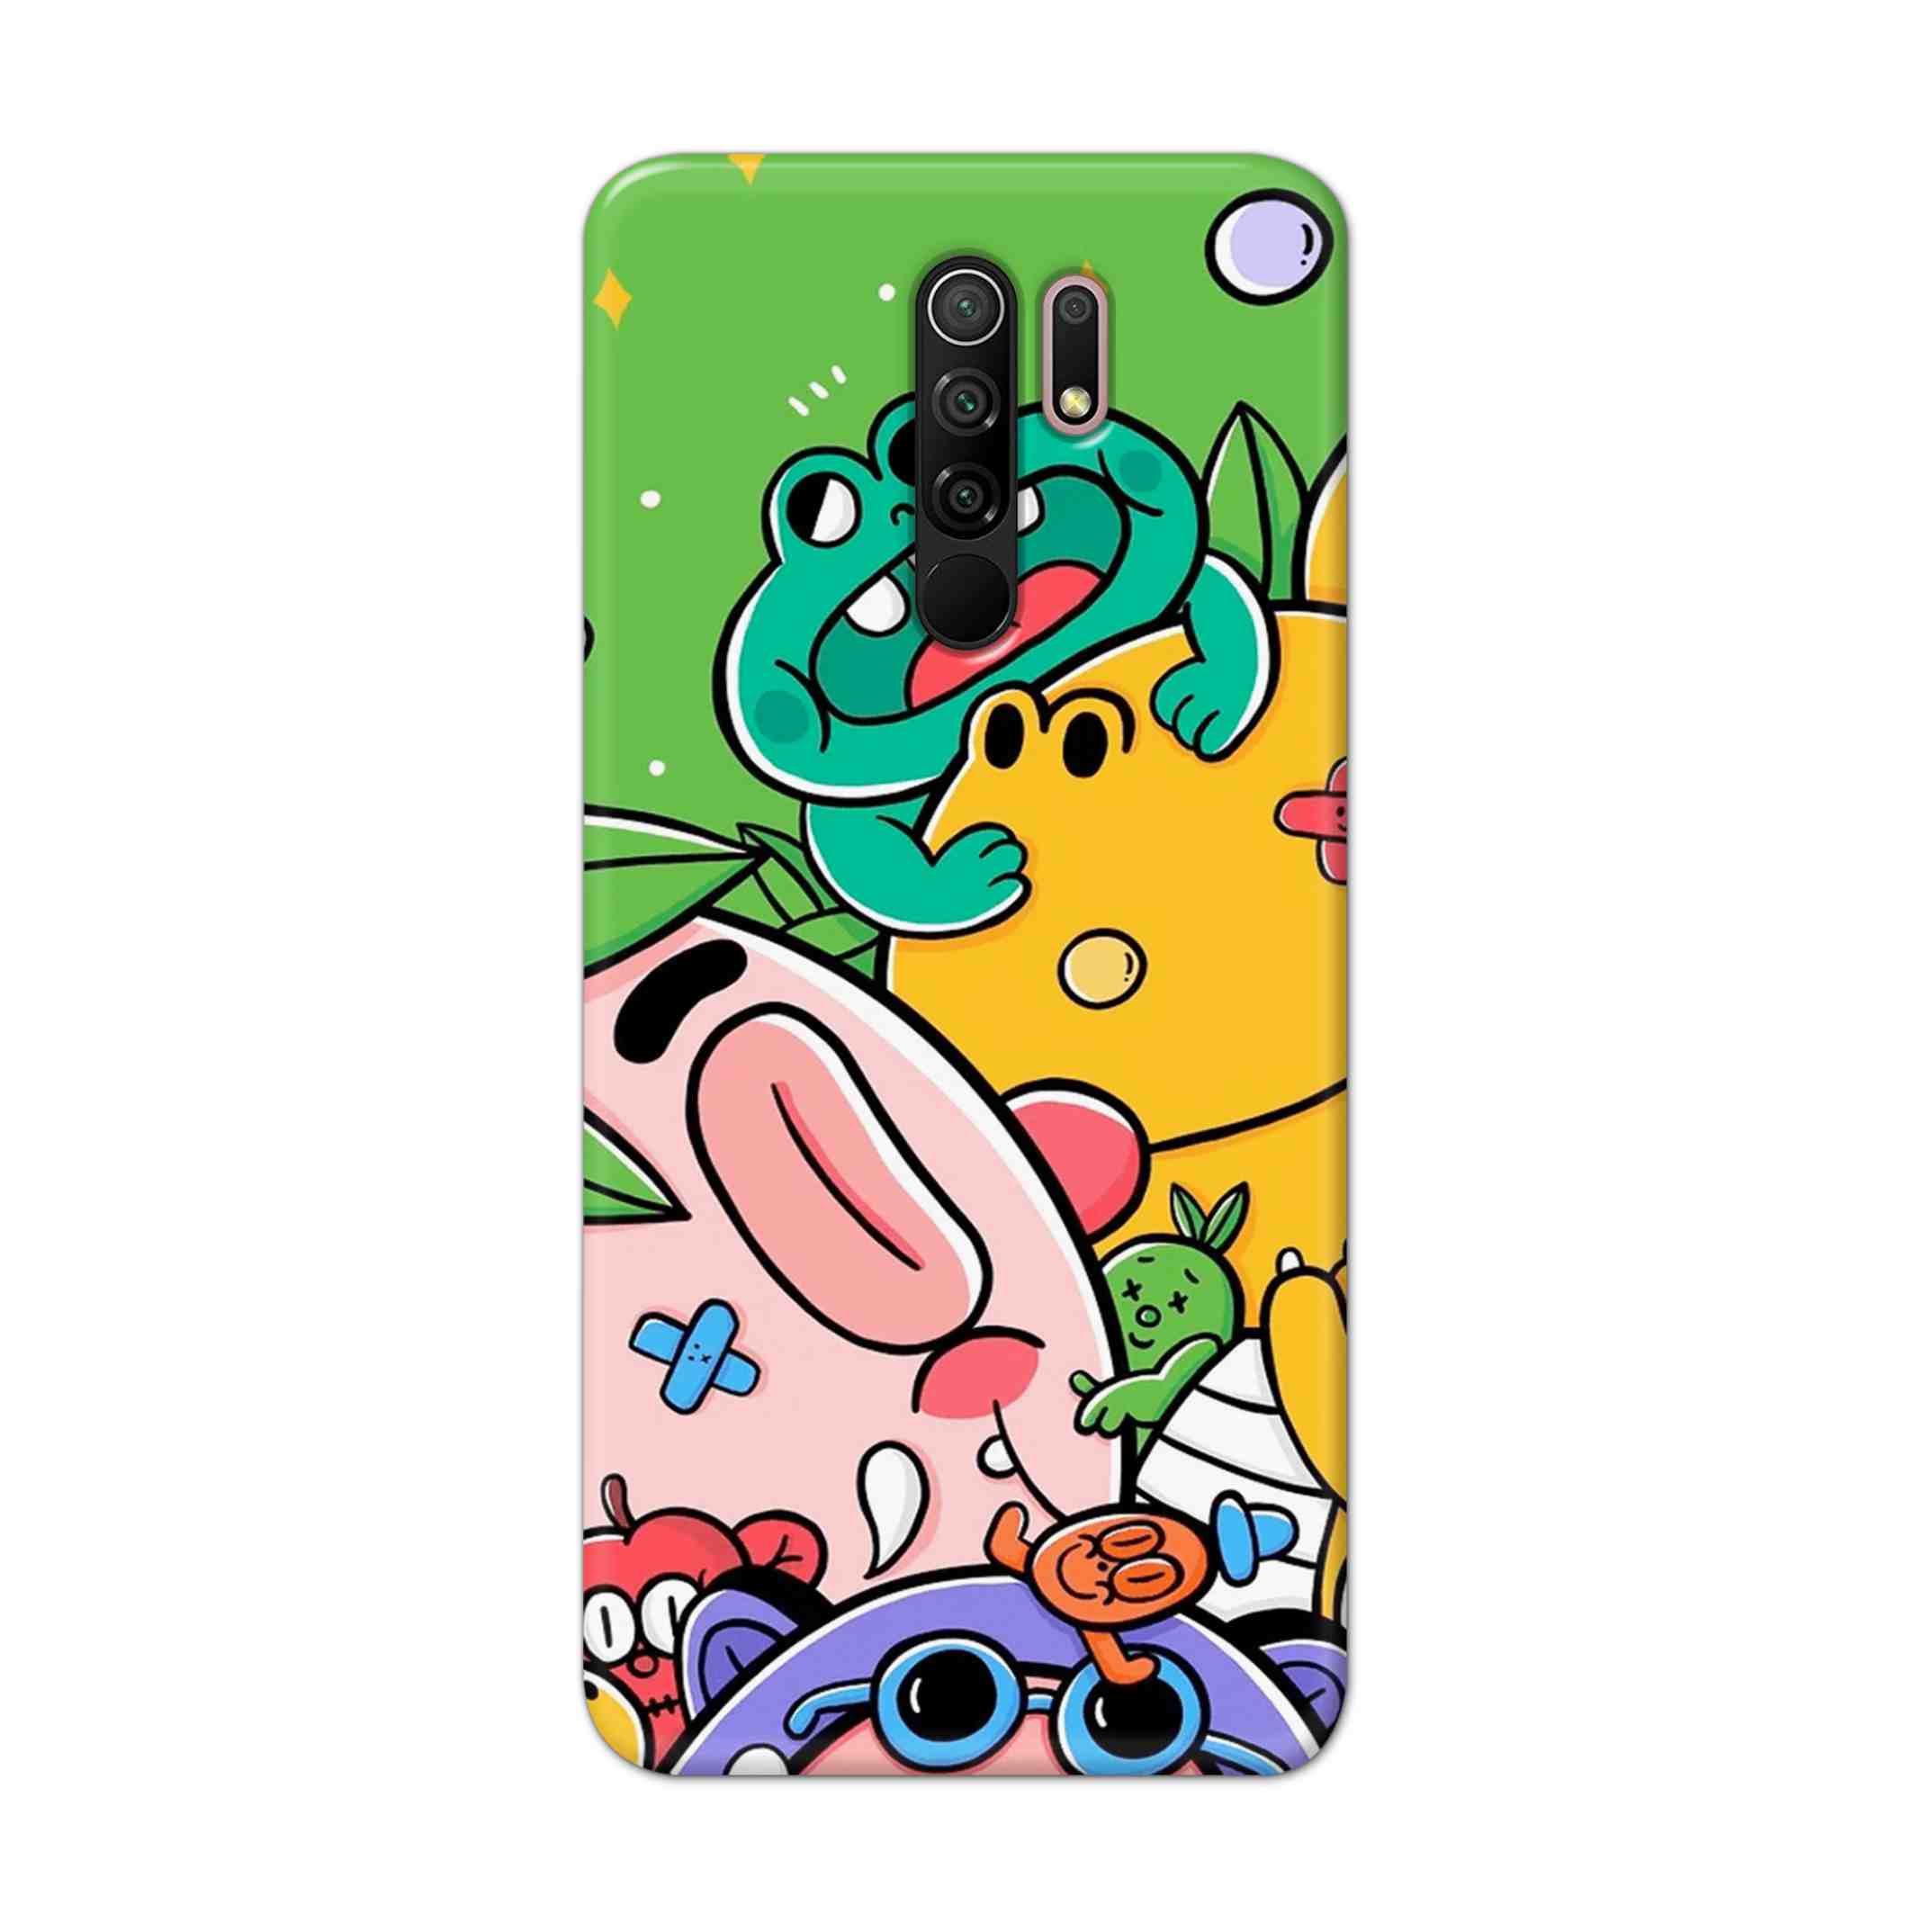 Buy Hello Feng San Hard Back Mobile Phone Case Cover For Xiaomi Redmi 9 Prime Online